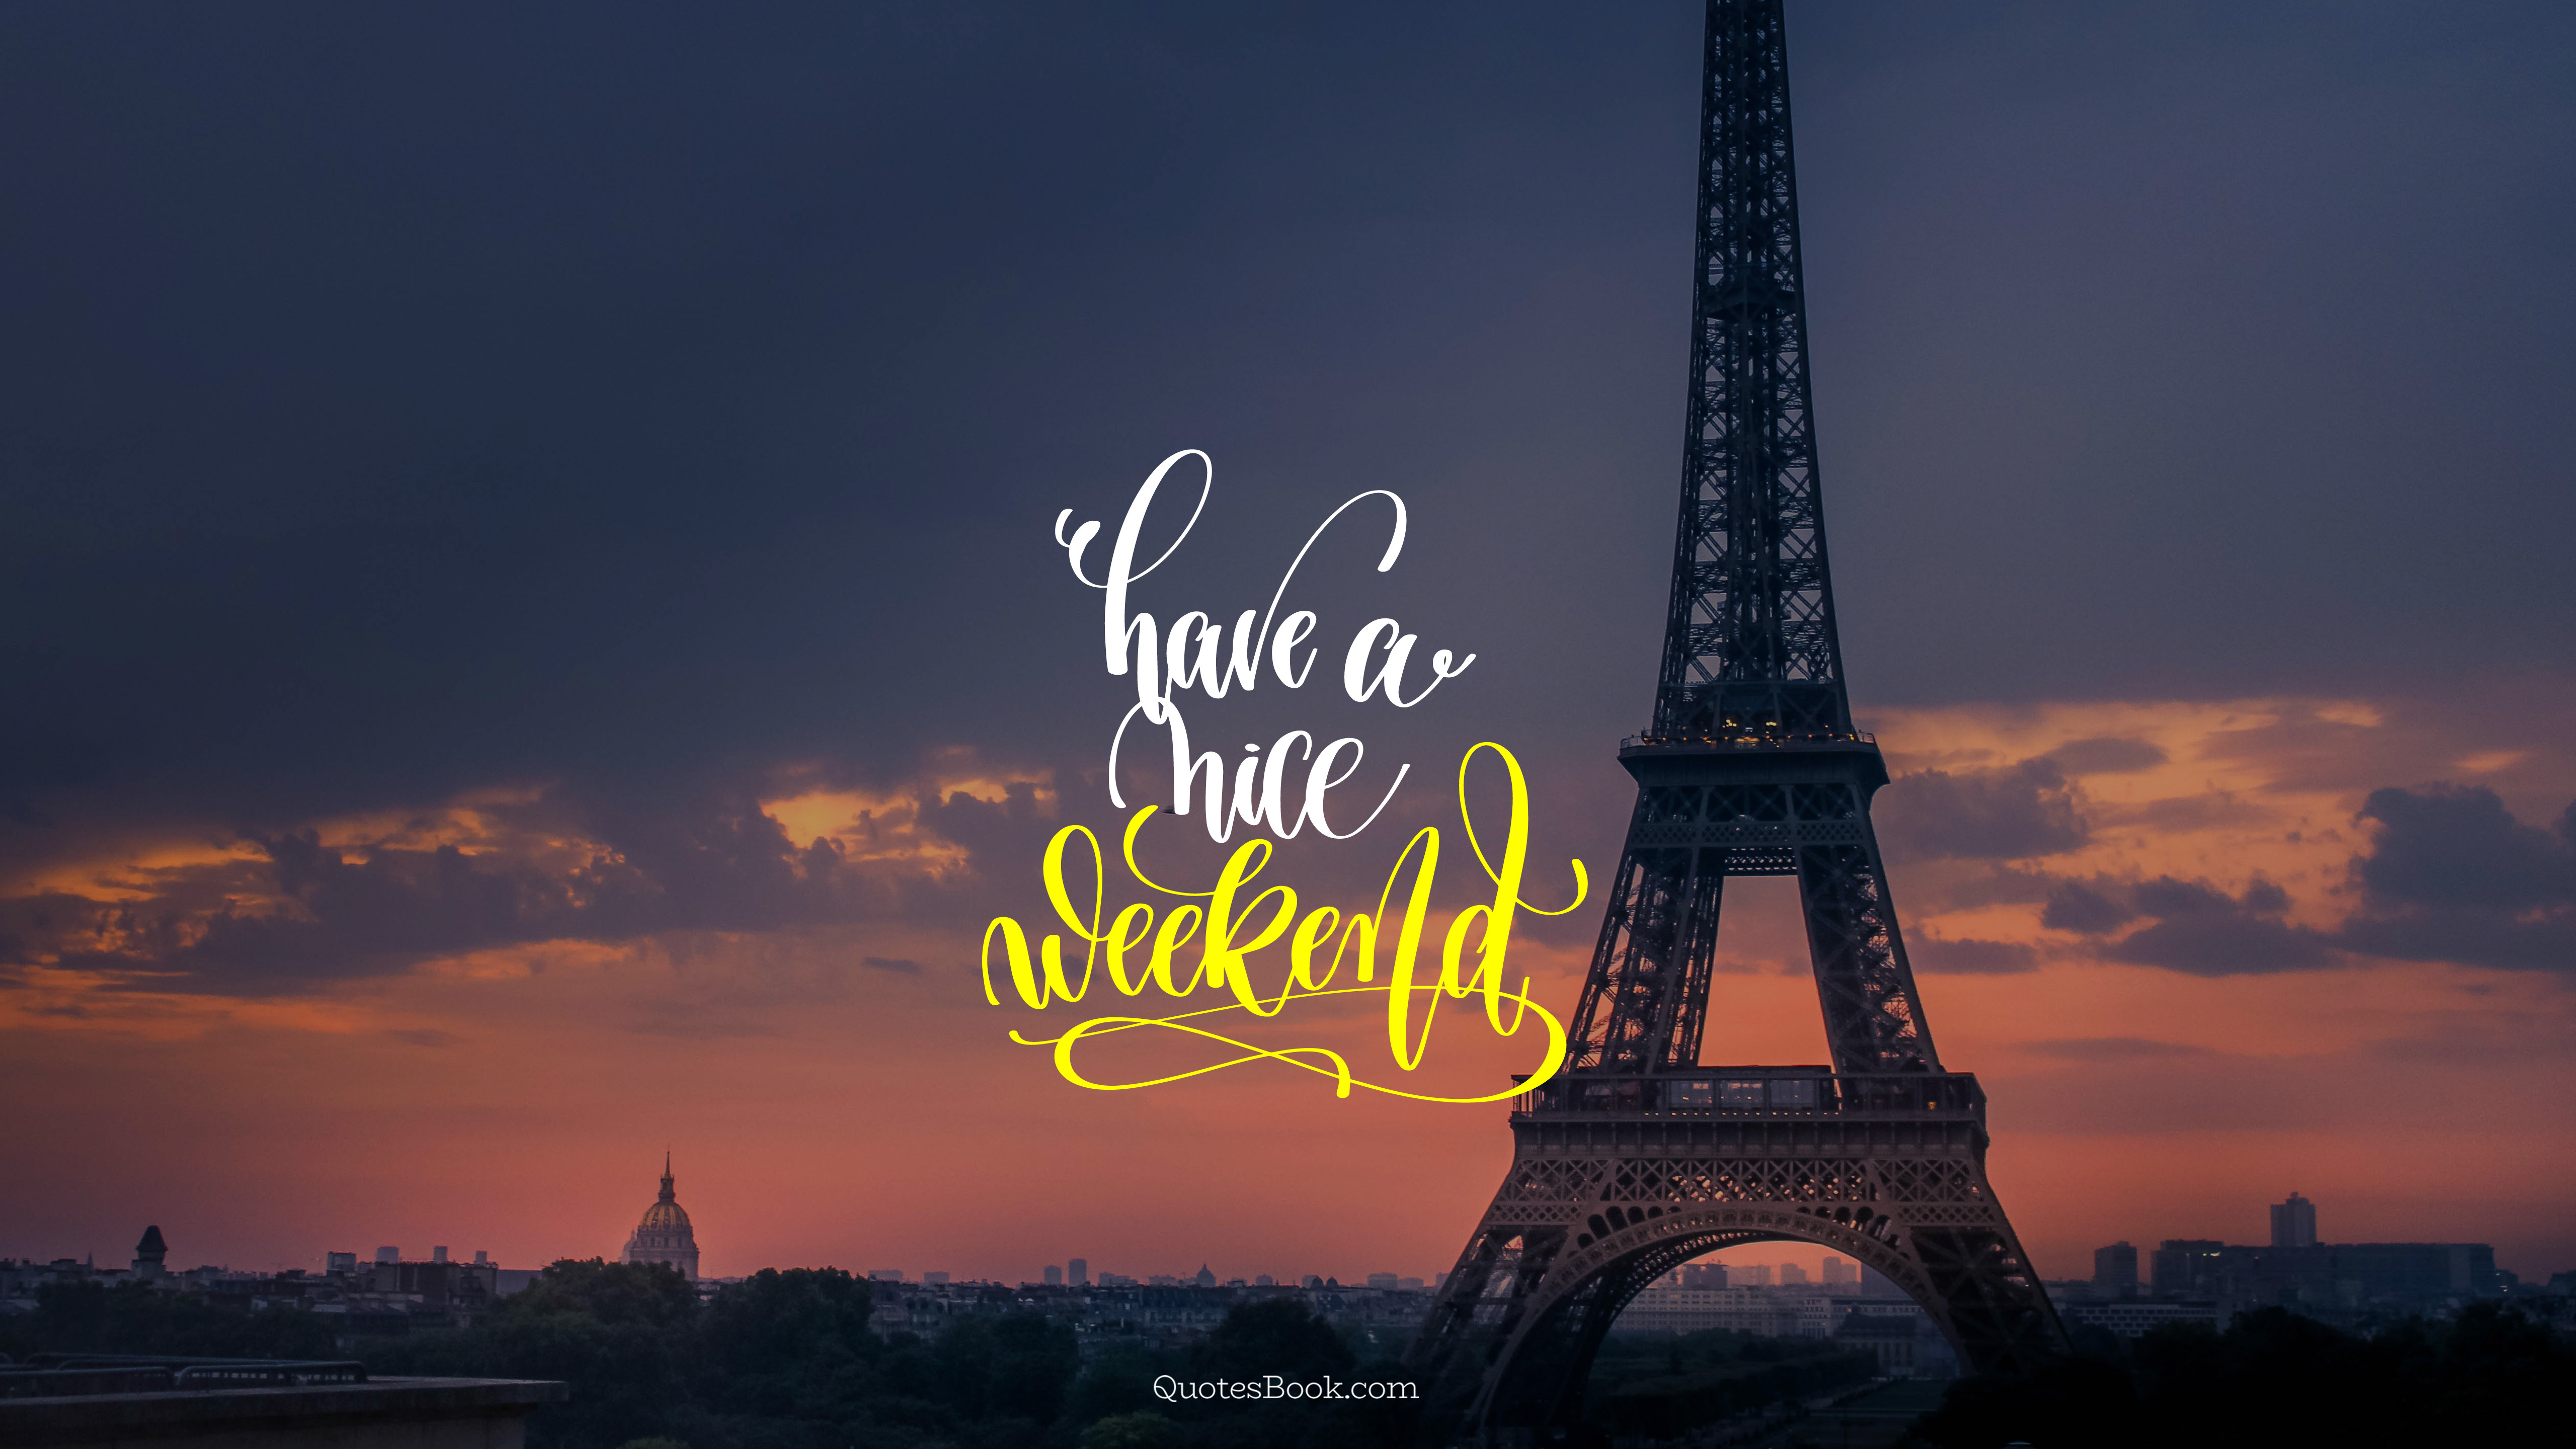 Have a nice weekend - QuotesBook